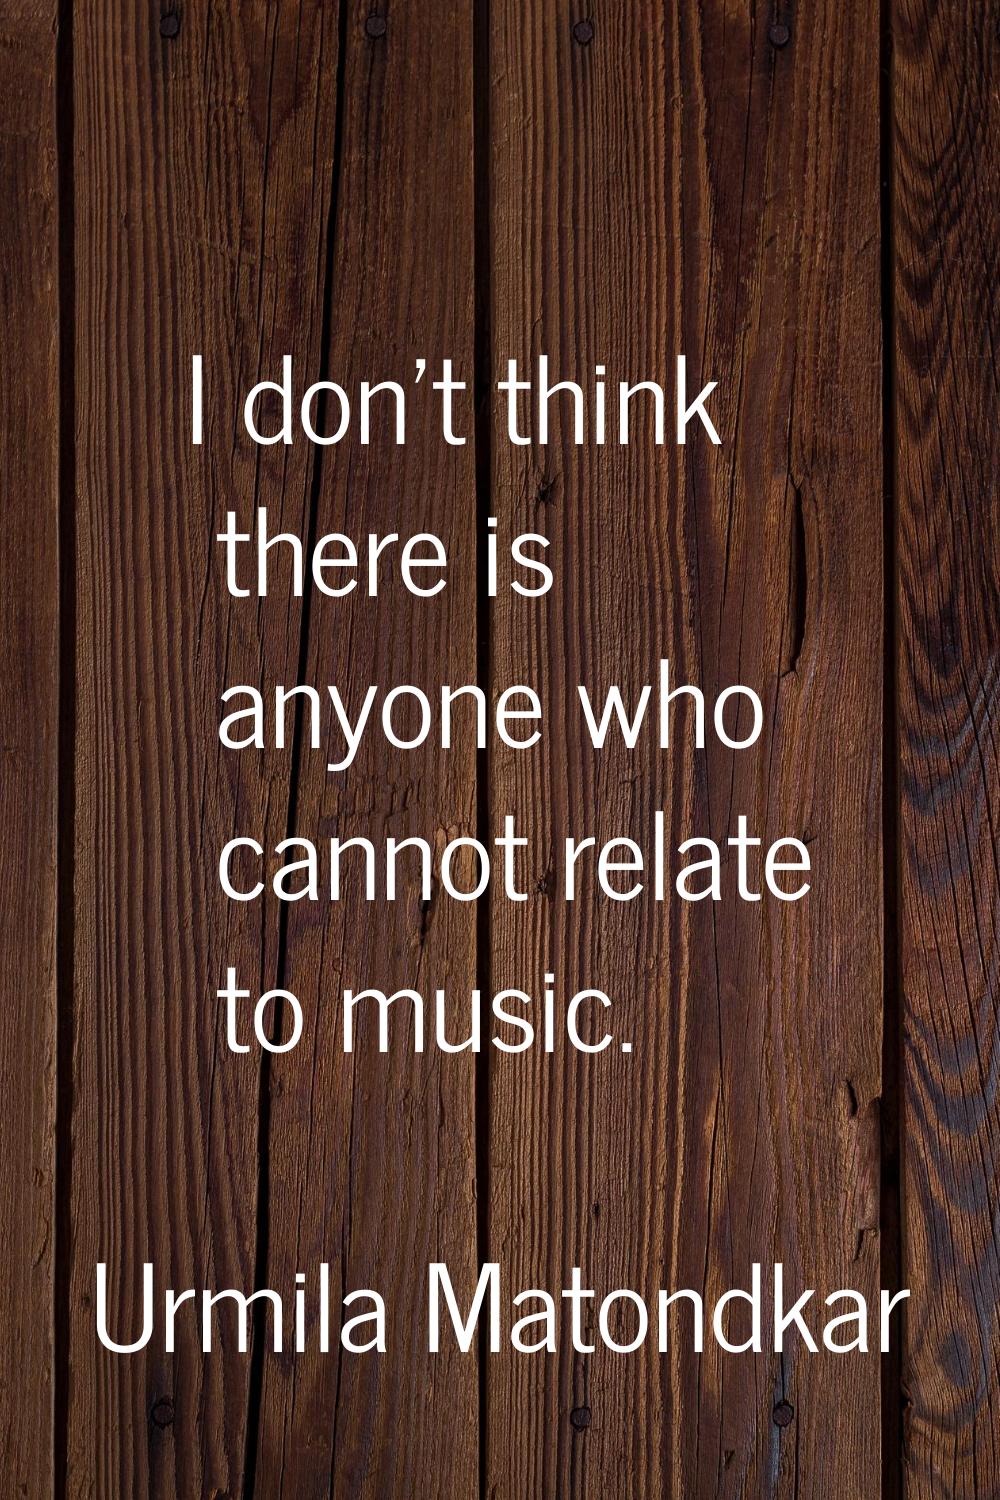 I don't think there is anyone who cannot relate to music.